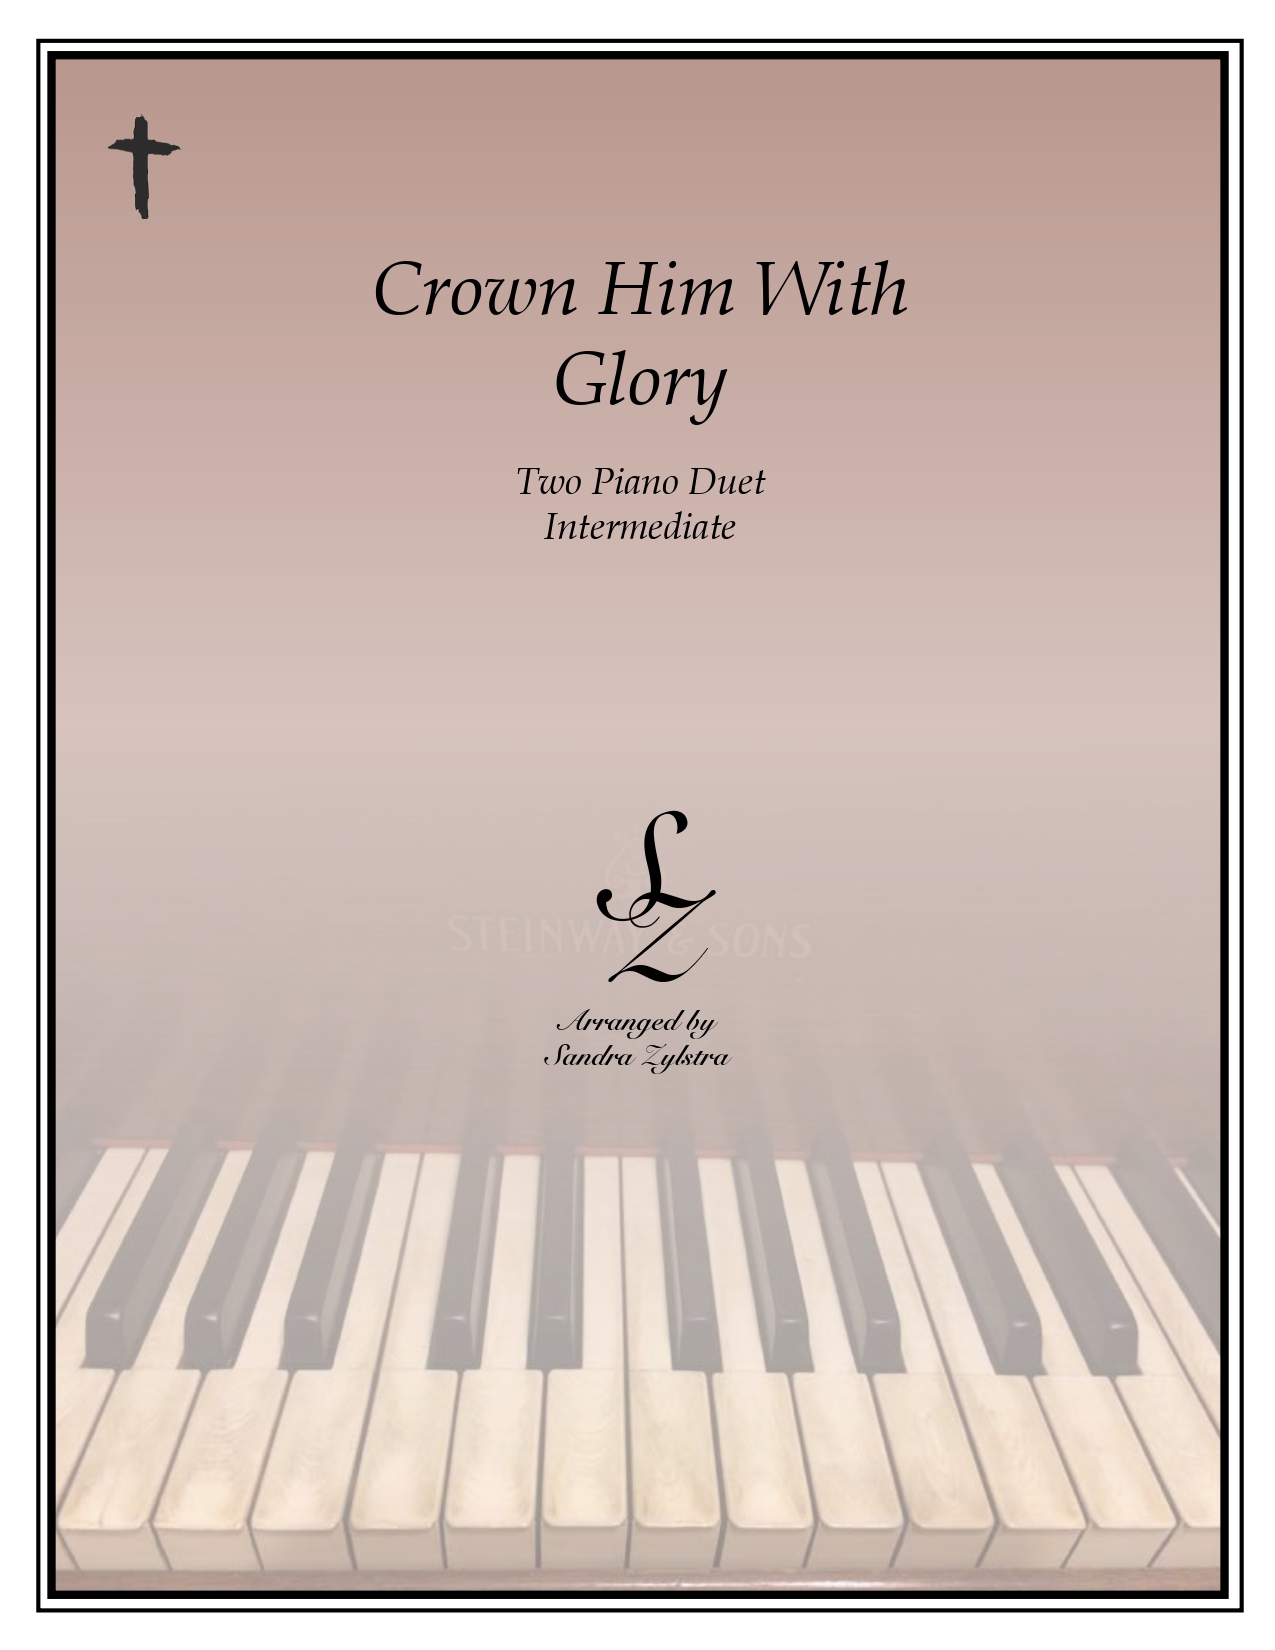 Crown Him With Glory Duet cover page 00011